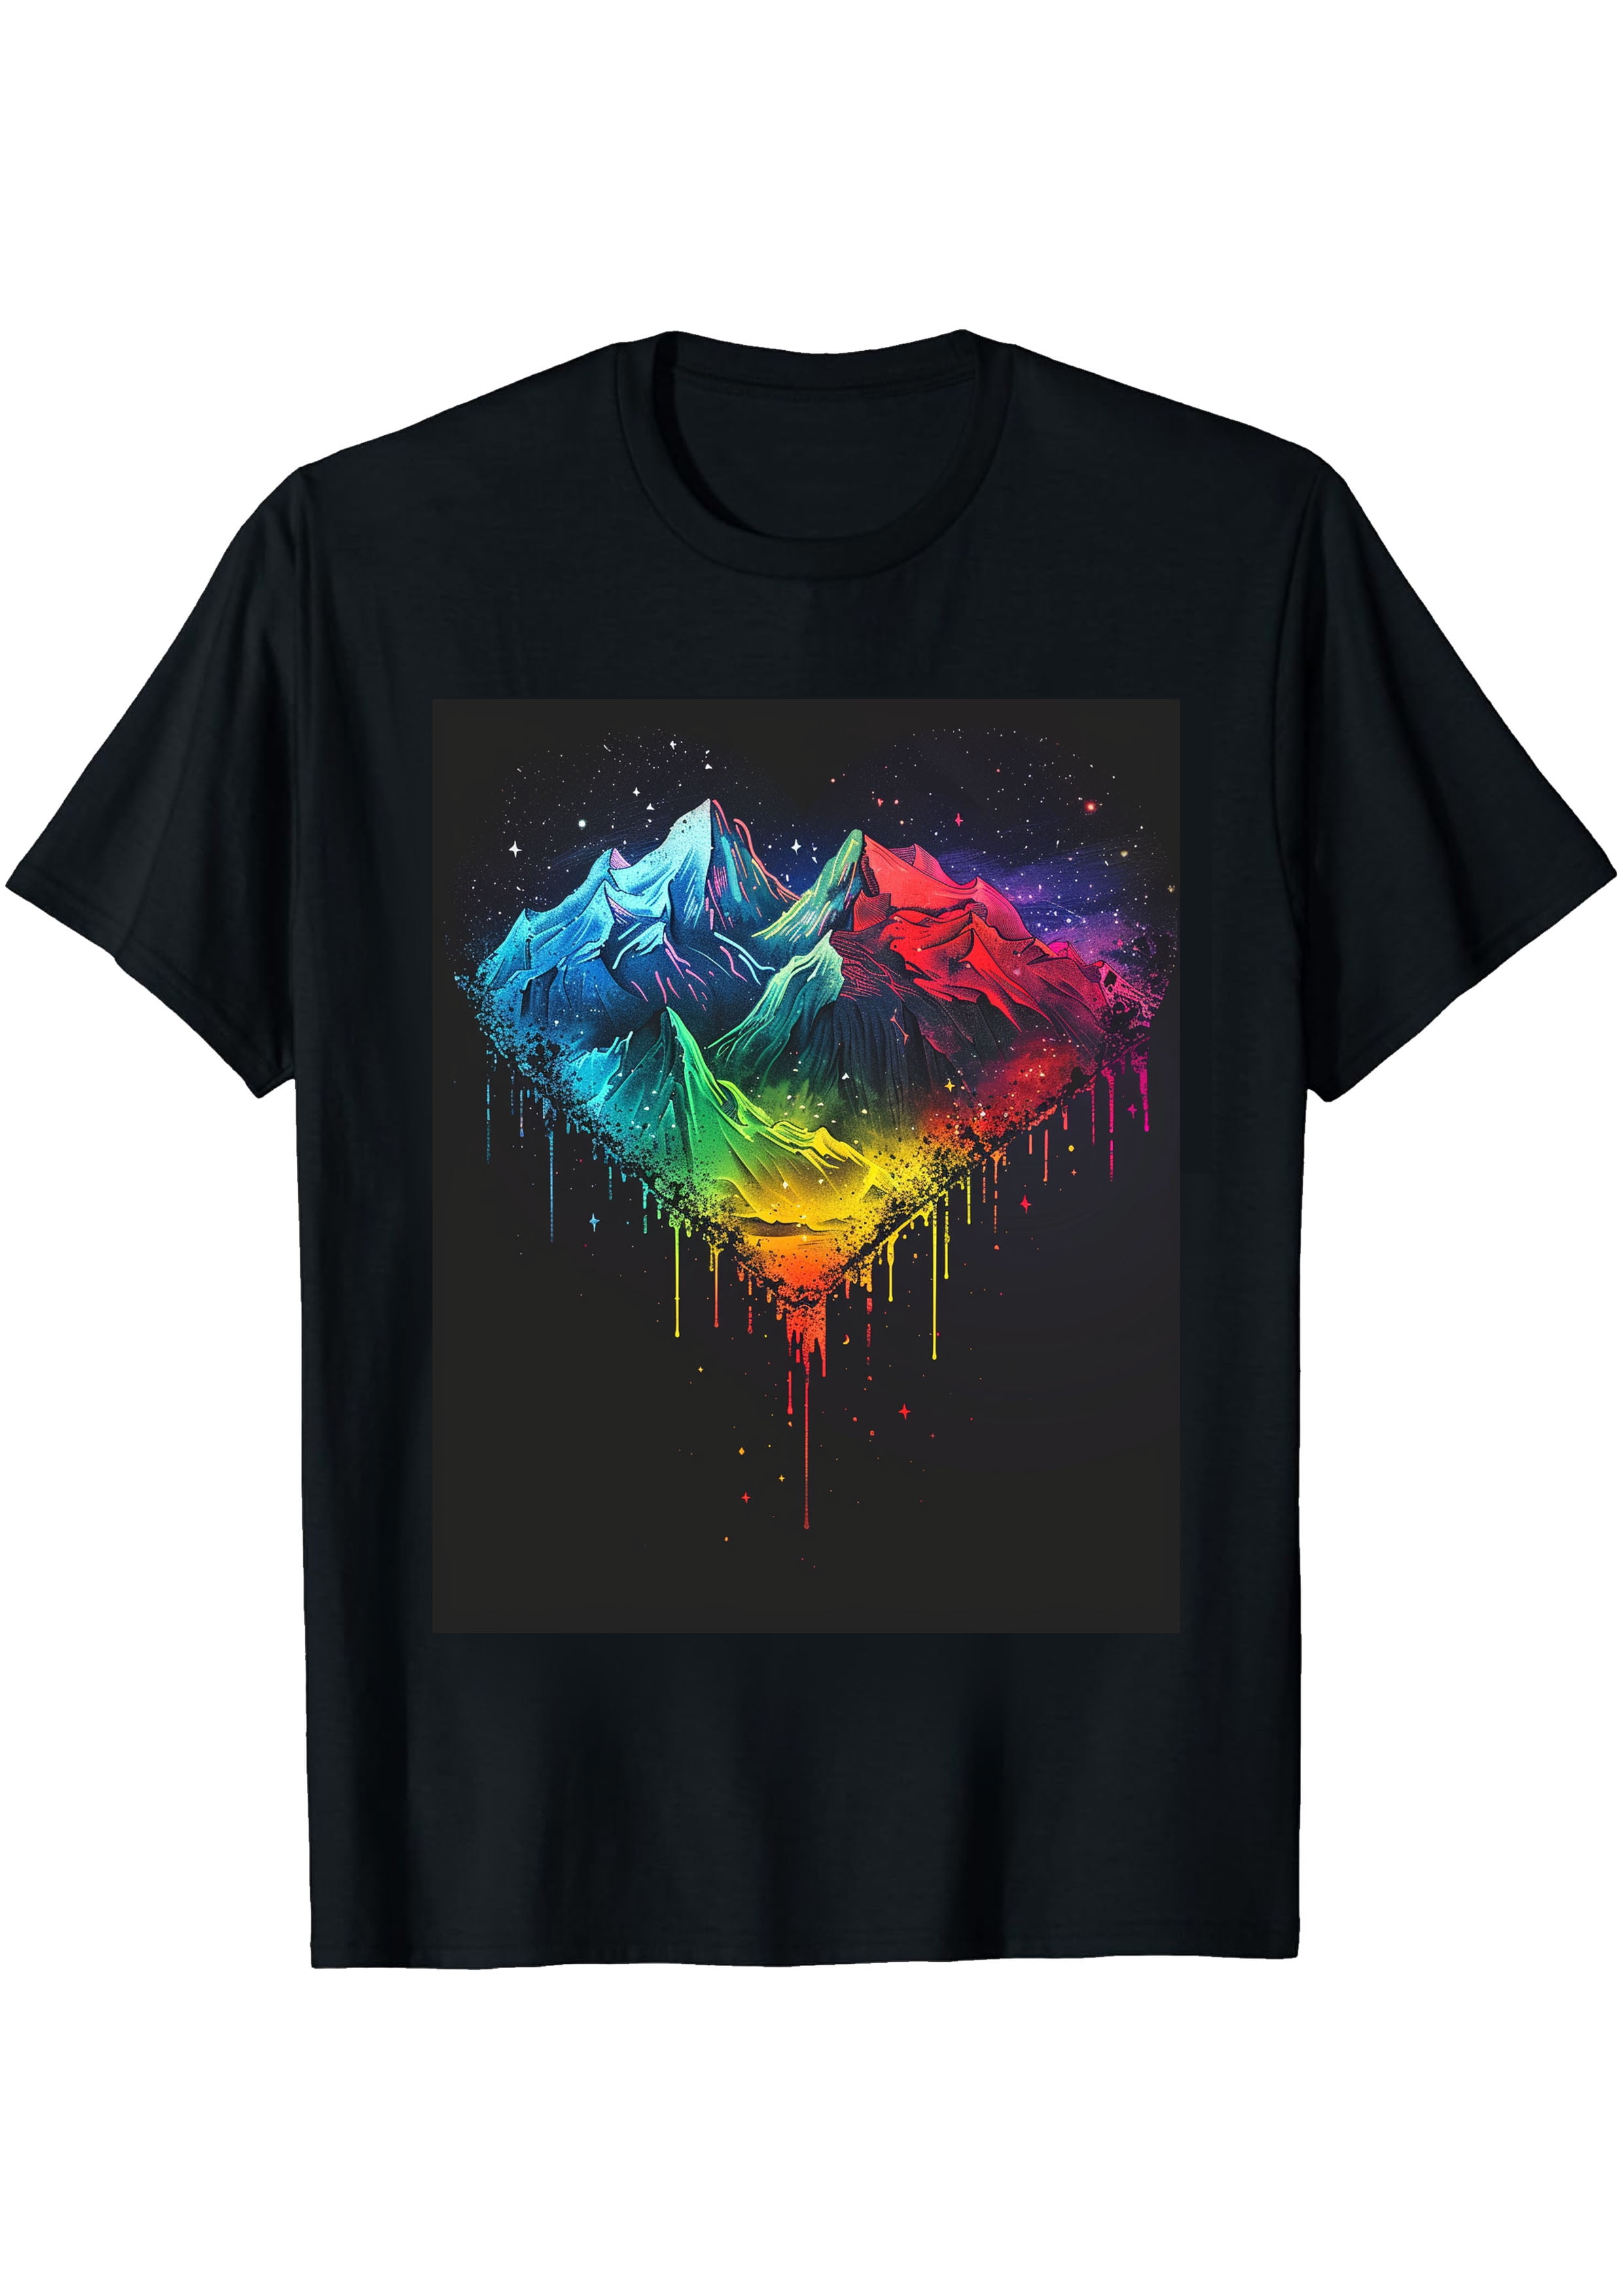 Miracle of the Starry Sky: Rainbow Mountains Star T-shirt, Light Up ...